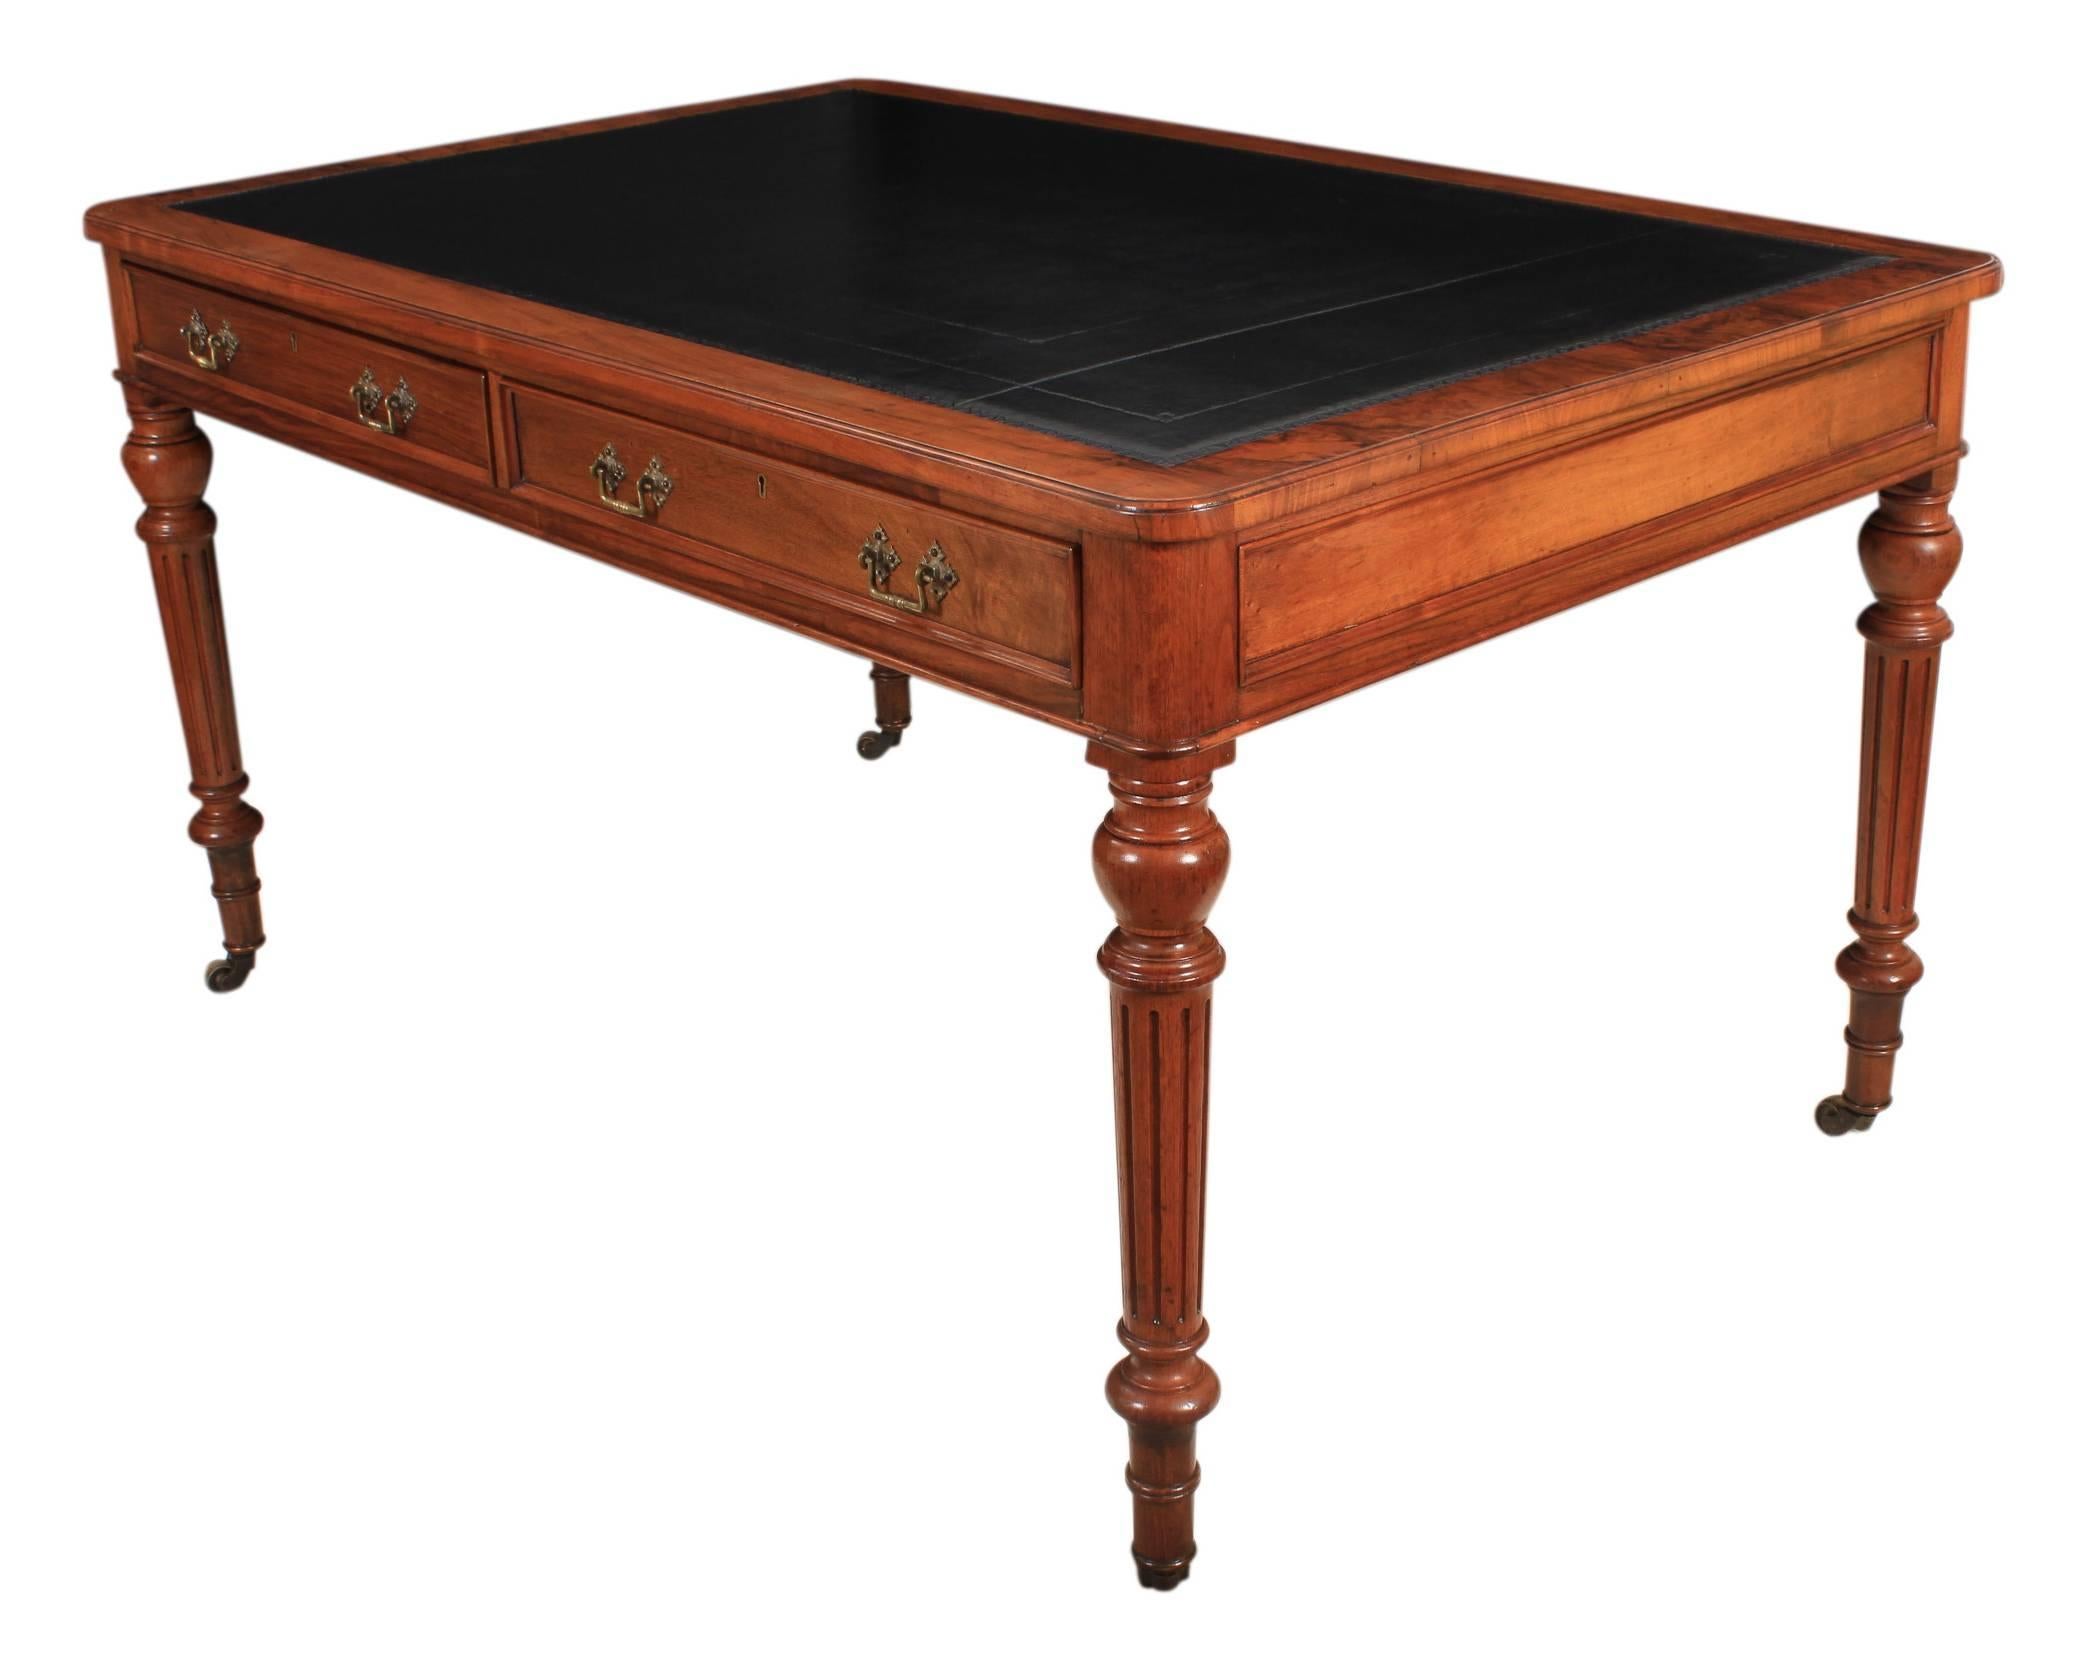 English, circa 1880.
A beautiful writing table, with a burr walnut cross-banded top and new black leather inset writing surface.
In lovely condition, is freestanding meaning it is finished all round and look great at every angle. The table has 2